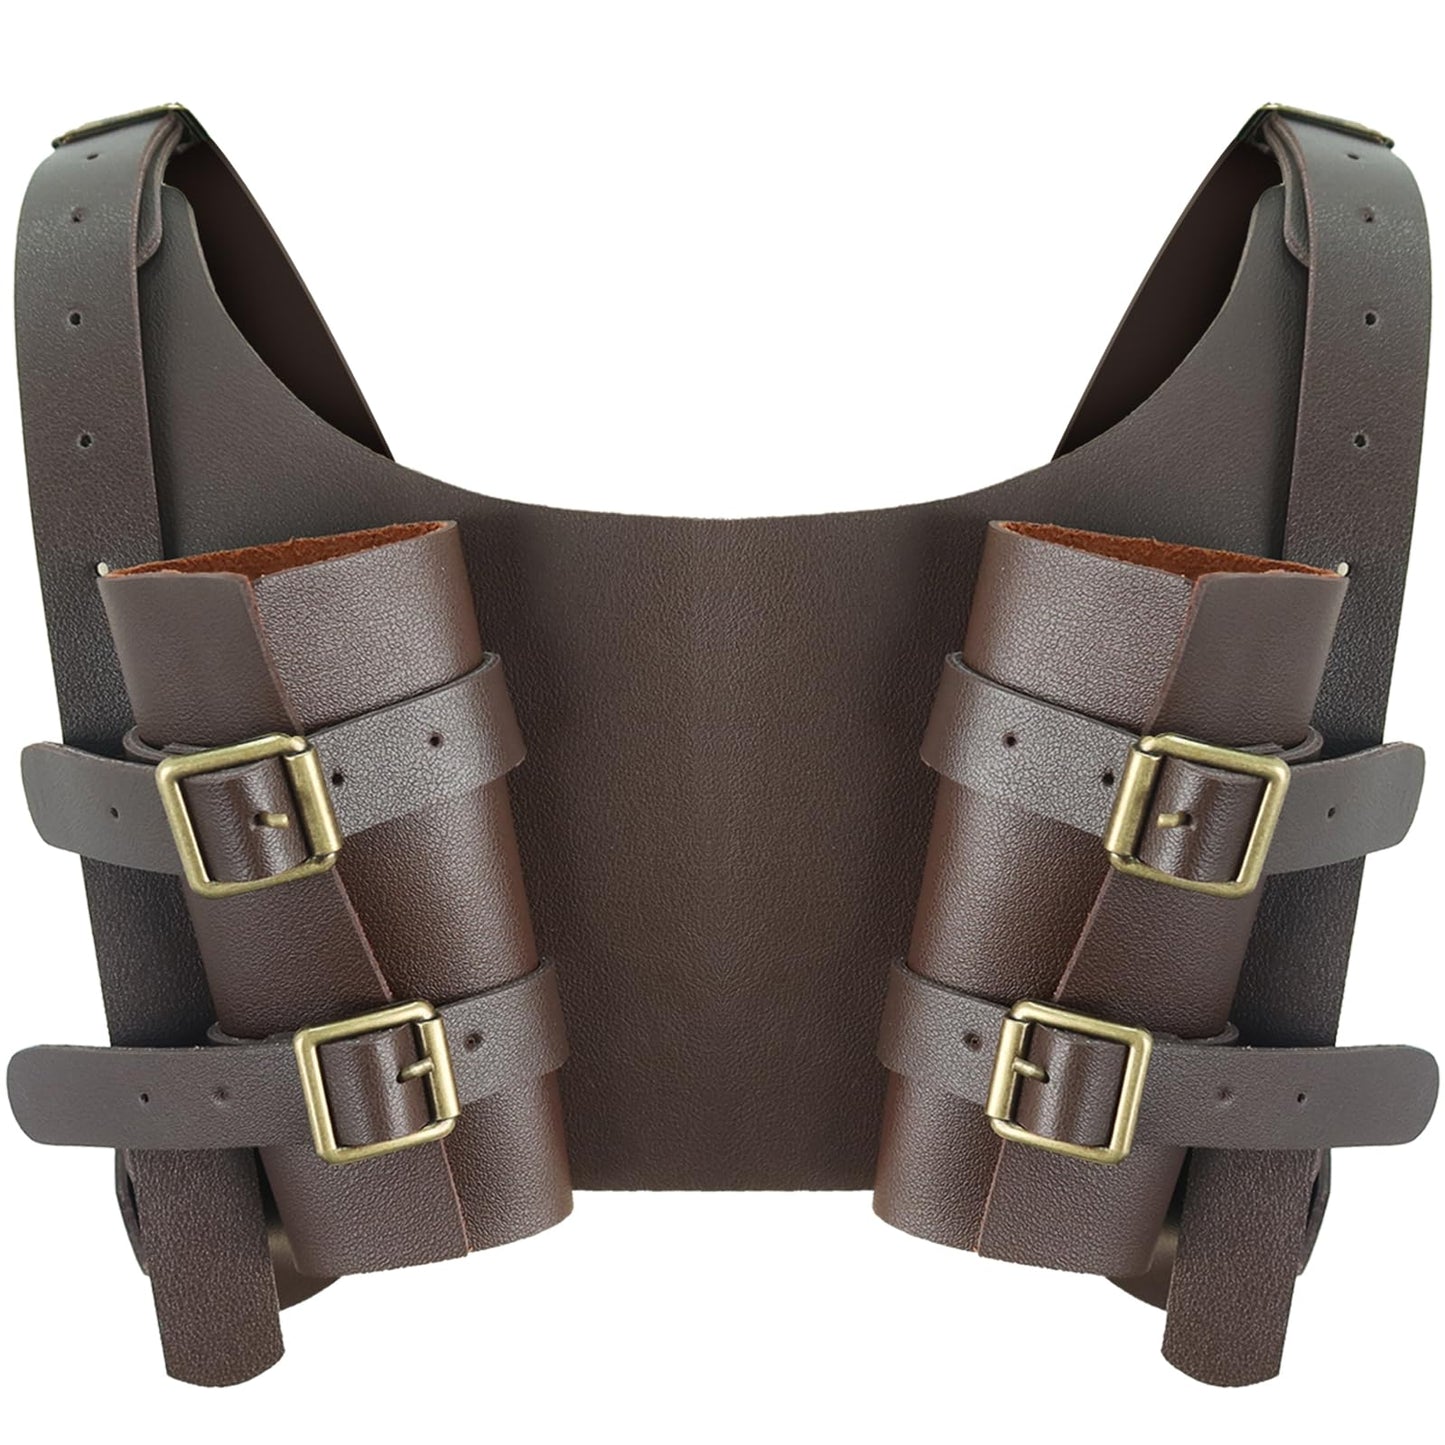 SMARCH Medieval Viking Leather Arm Guards for Men Renaissance Renaissance Viking Pirates Cosplay Costume Accessories for Halloween Parties, LARP and Ren Faire Cosplay (Brown) Arm Guards Brown